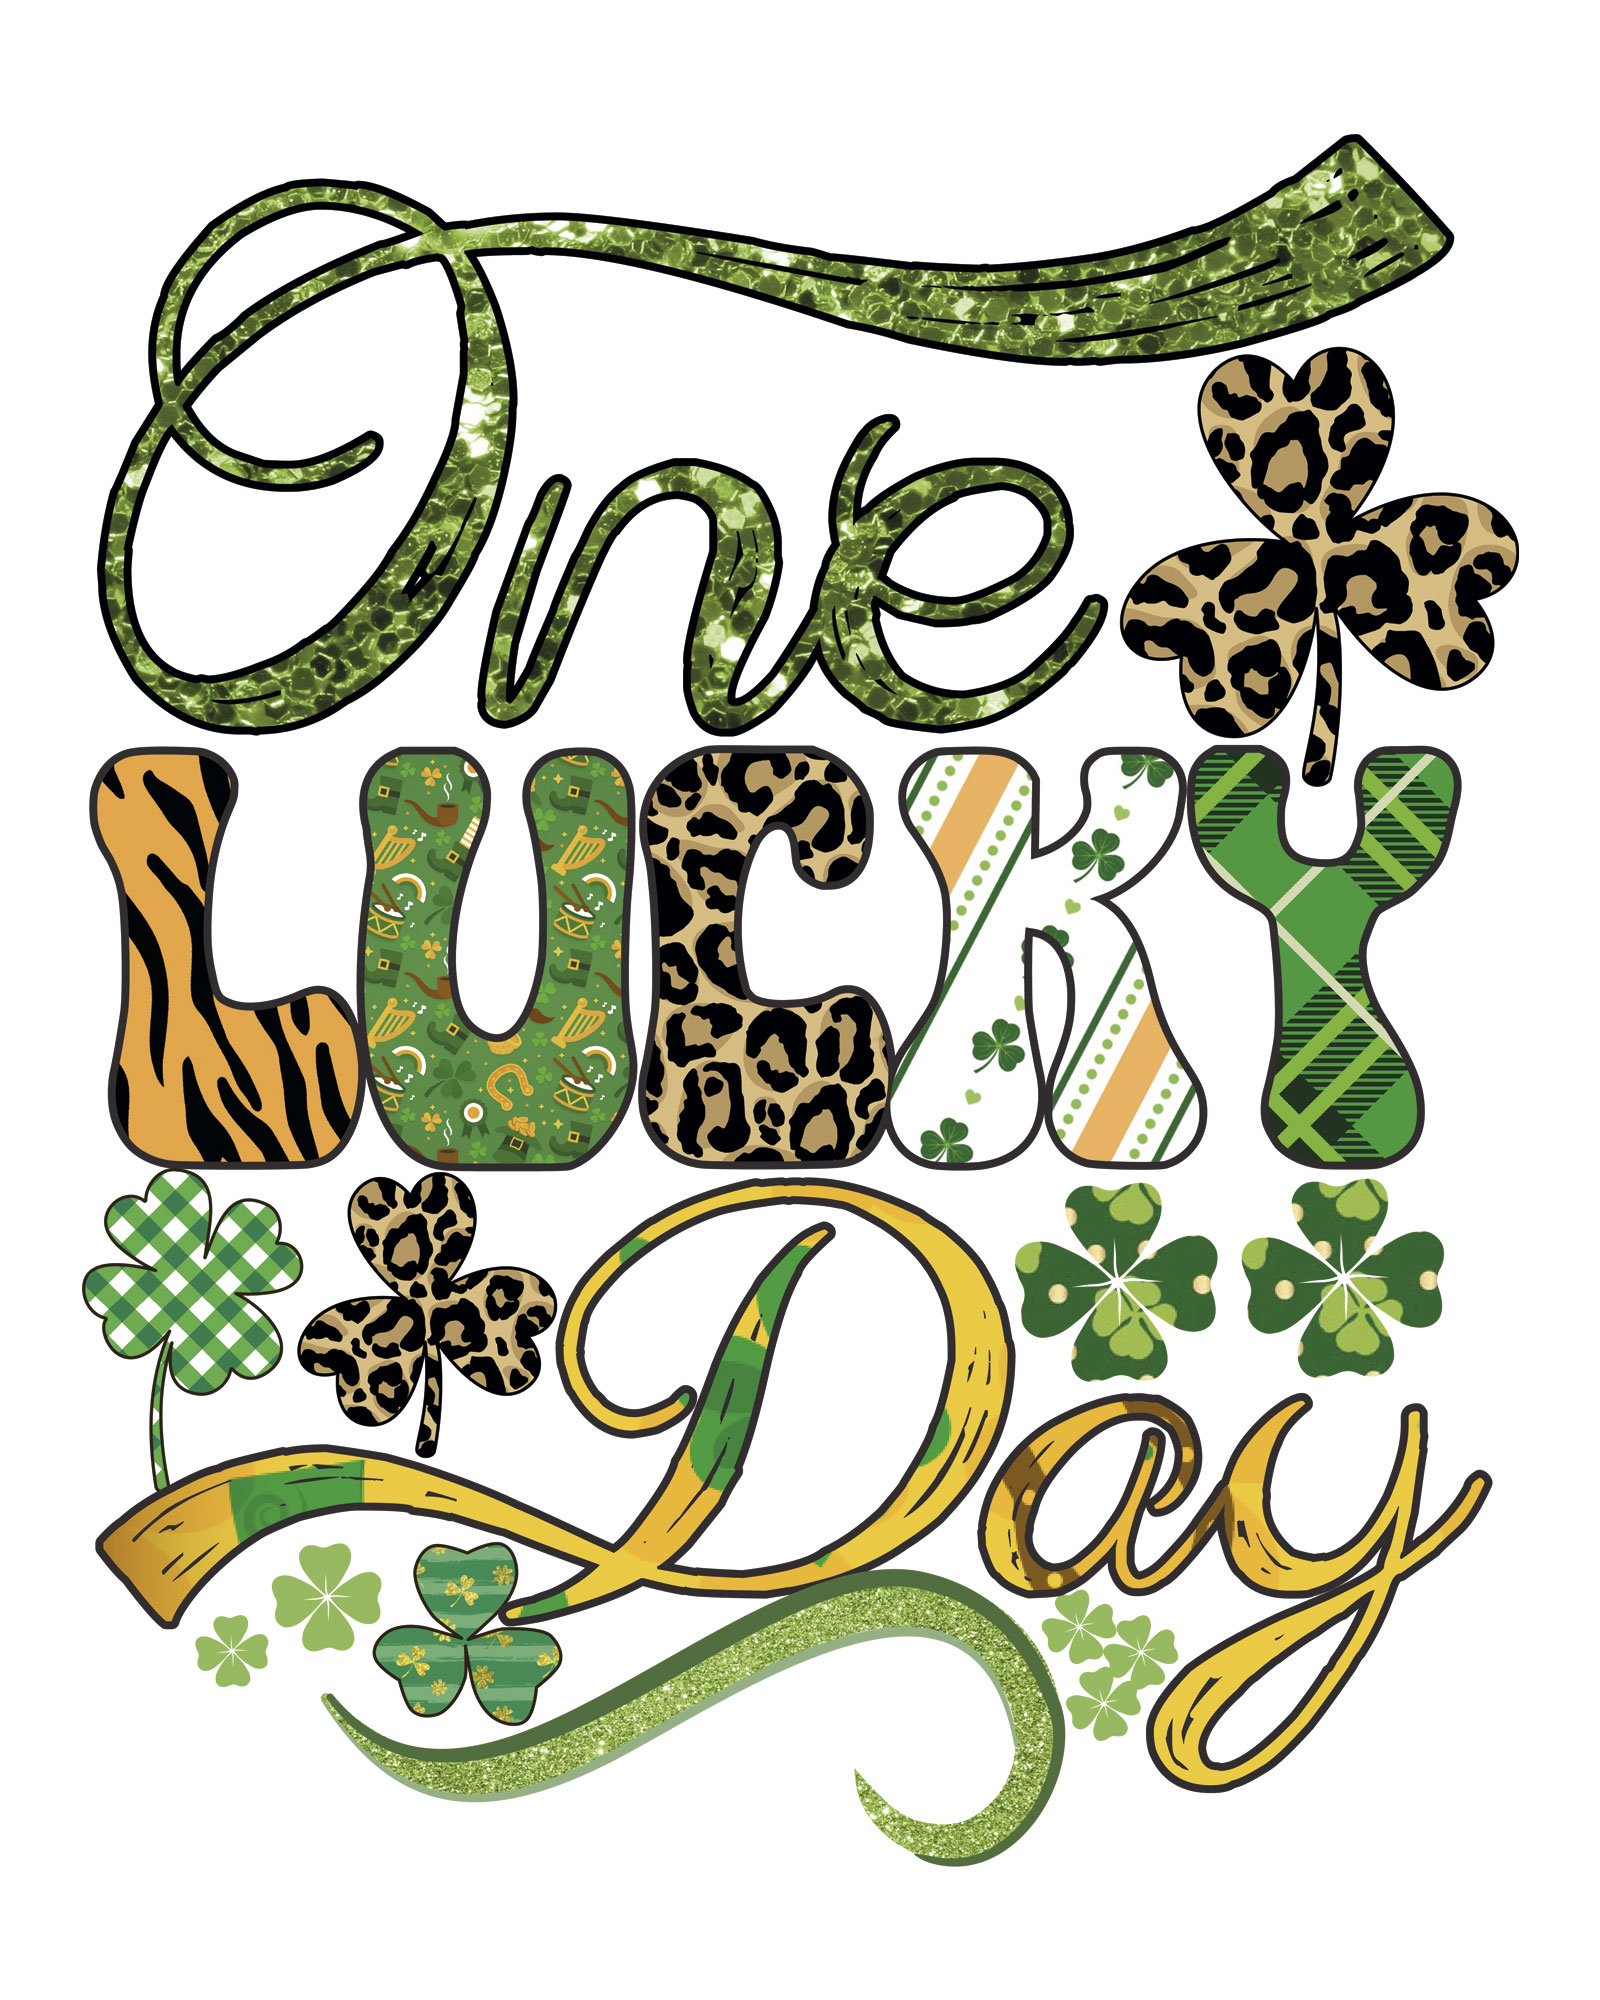 One Lucky Day design - St. Patrick’s Day